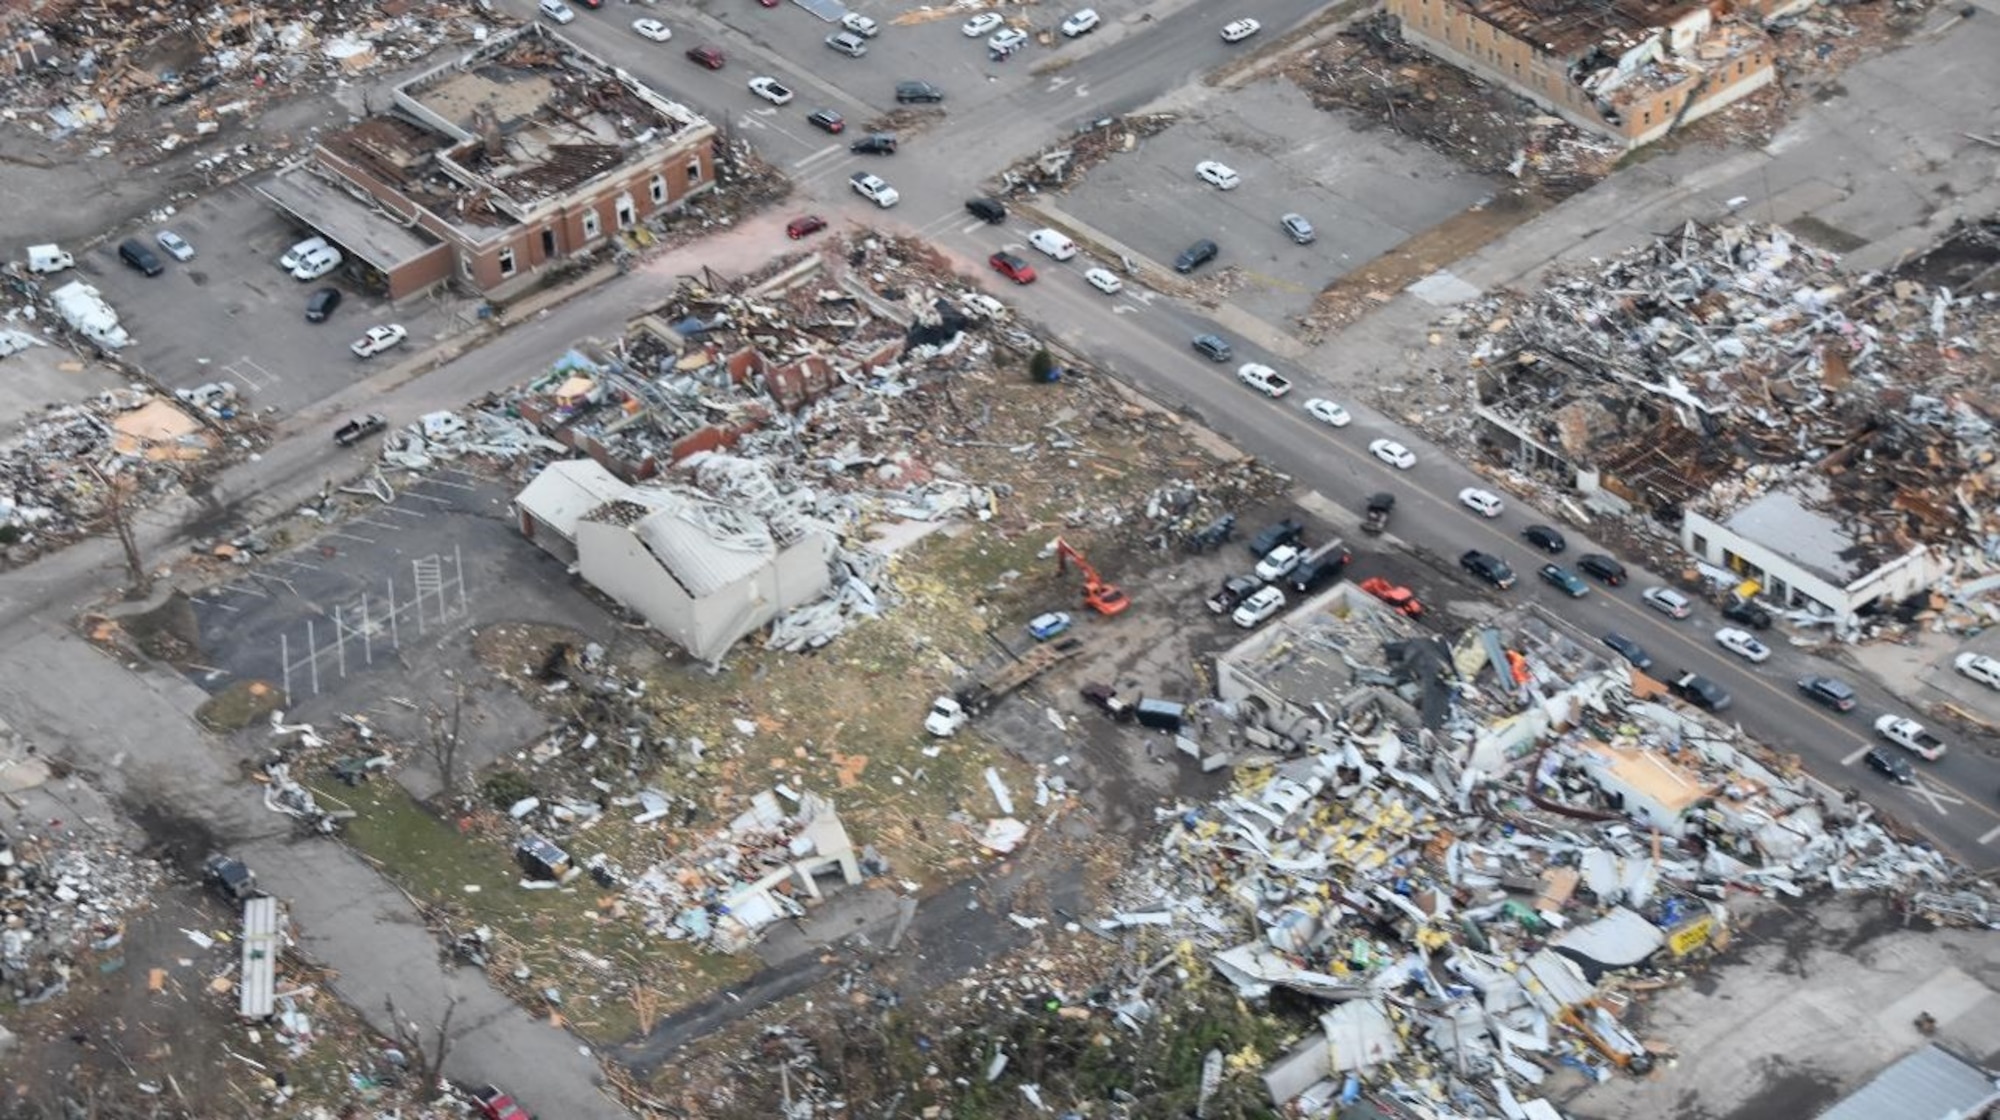 CAP - Kentucky Wing reacts to December 2021 tornado with assessment missions